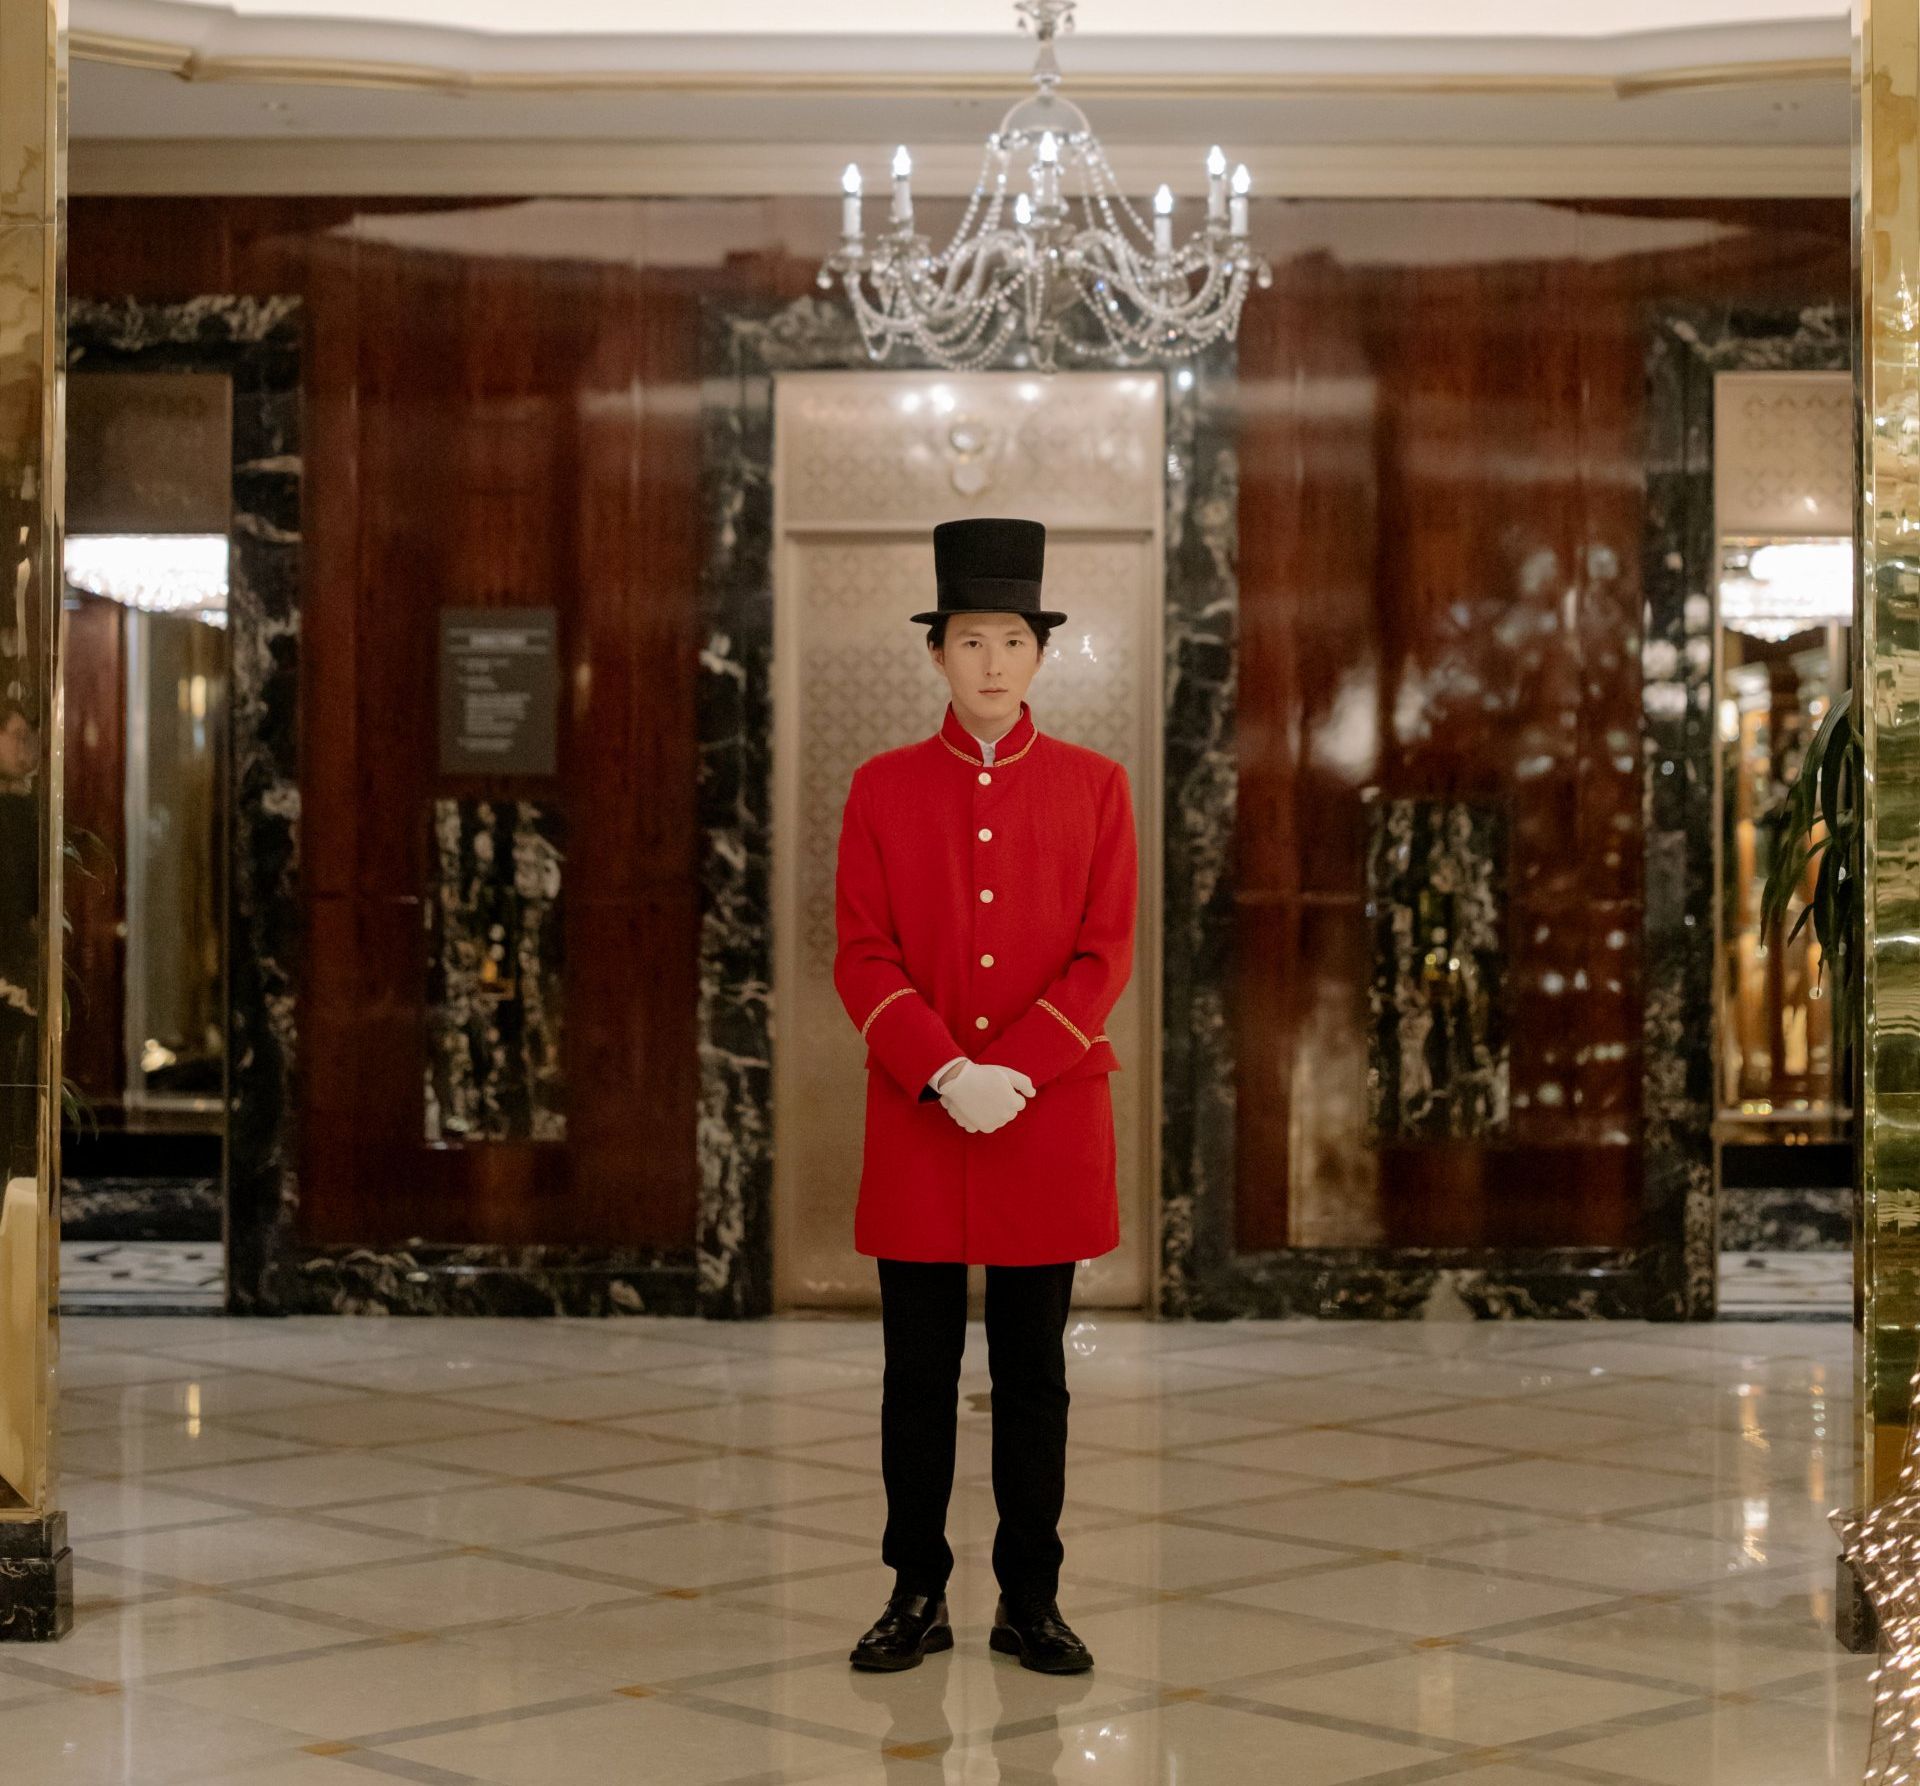 A man in a red coat and top hat stands in front of an elevator